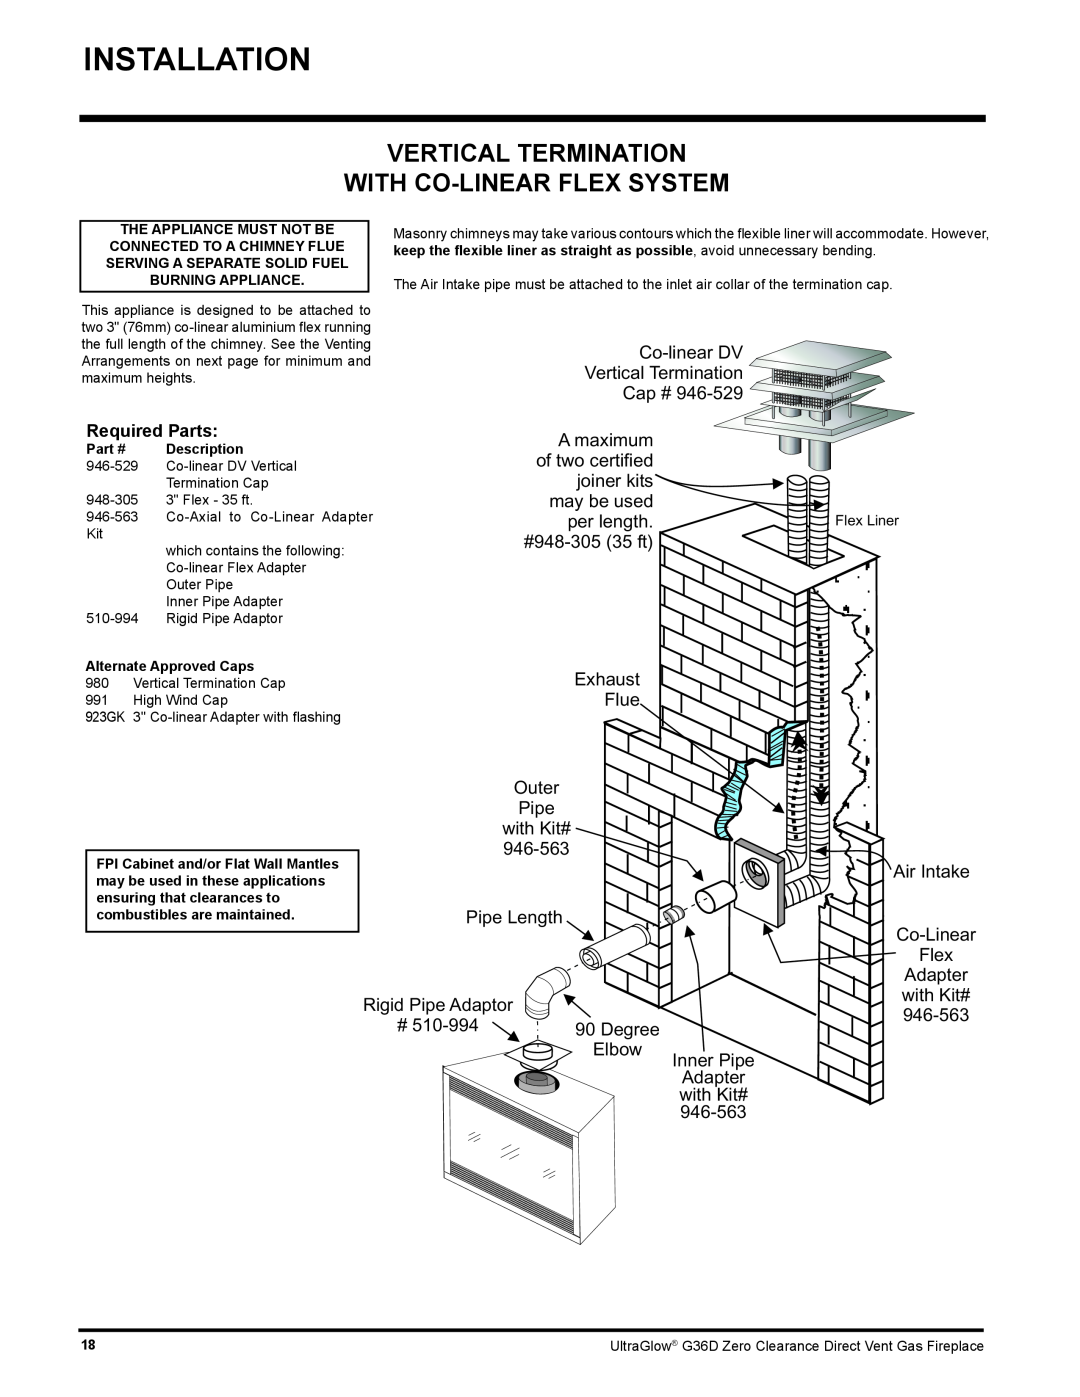 Regency G36D installation manual Vertical Termination With Co-Linearflex System, Installation 